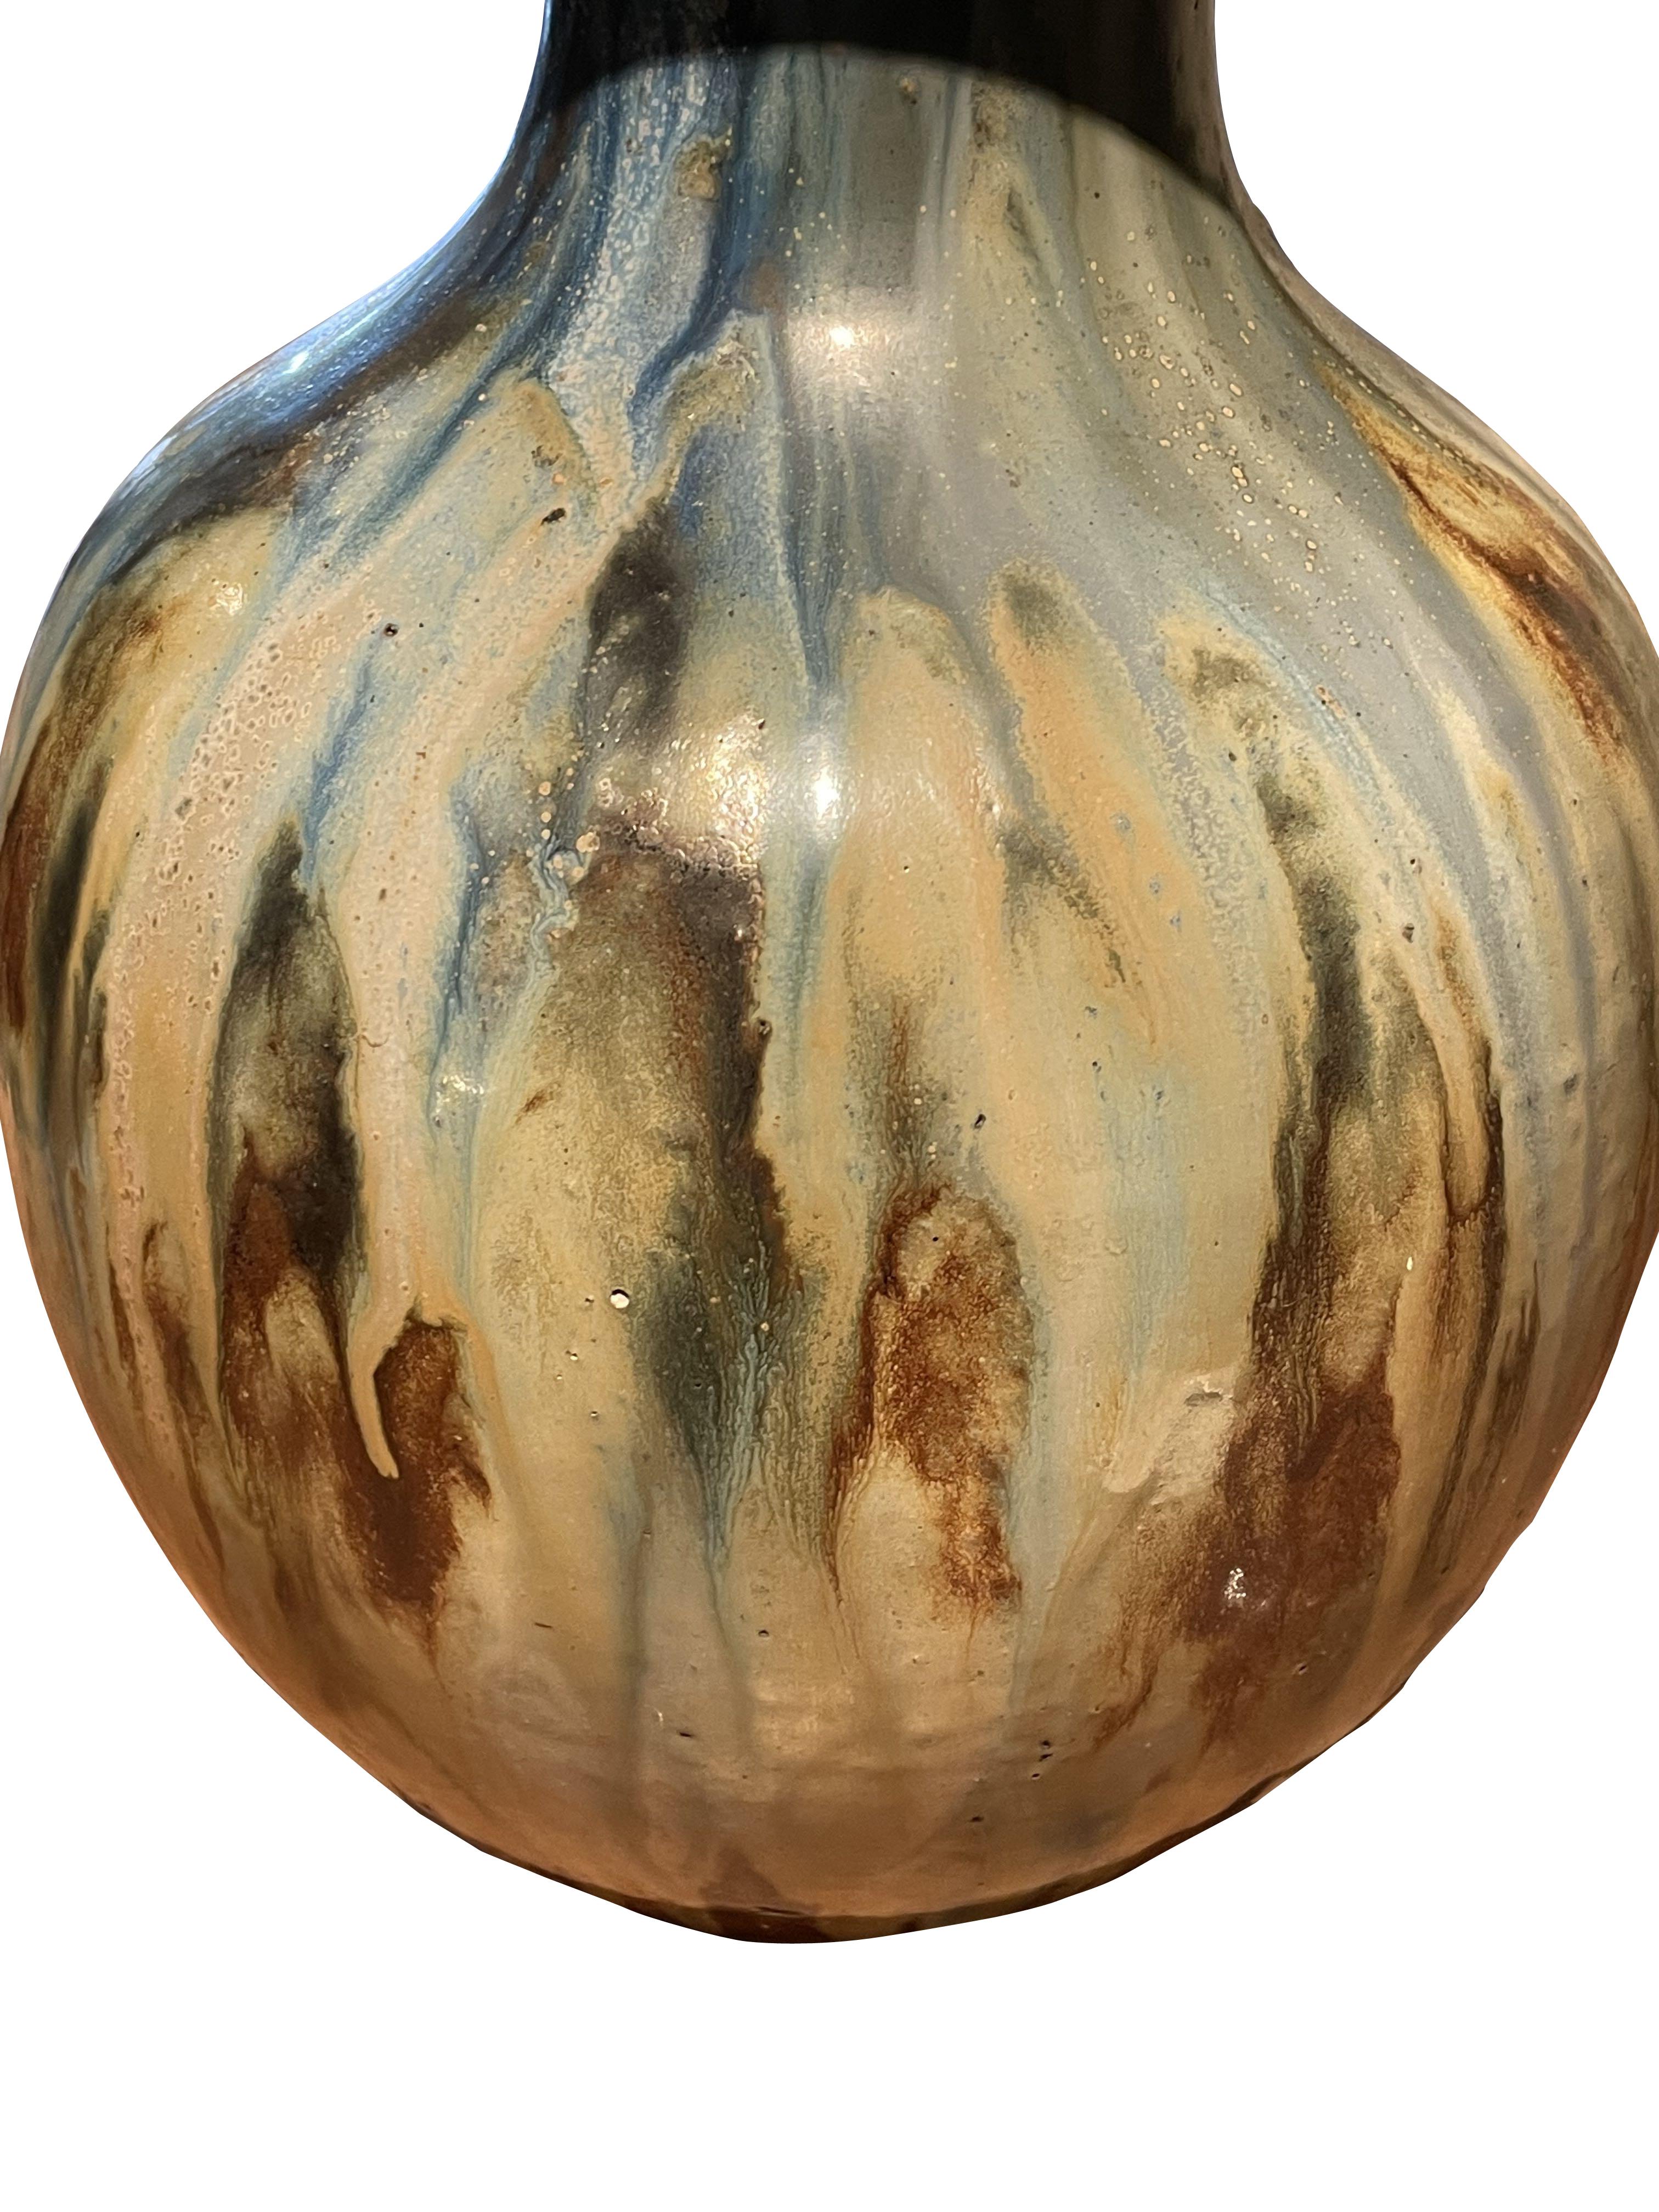 1920's Belgian Roger Guerin ( 1892 - 1954 ) signed drip glaze  stoneware vase.
Guérin was known largely for his Modernist experiments with salt glaze techniques, and after winning a medal at the Paris Exposition des Arts Décoratifs in 1925, was